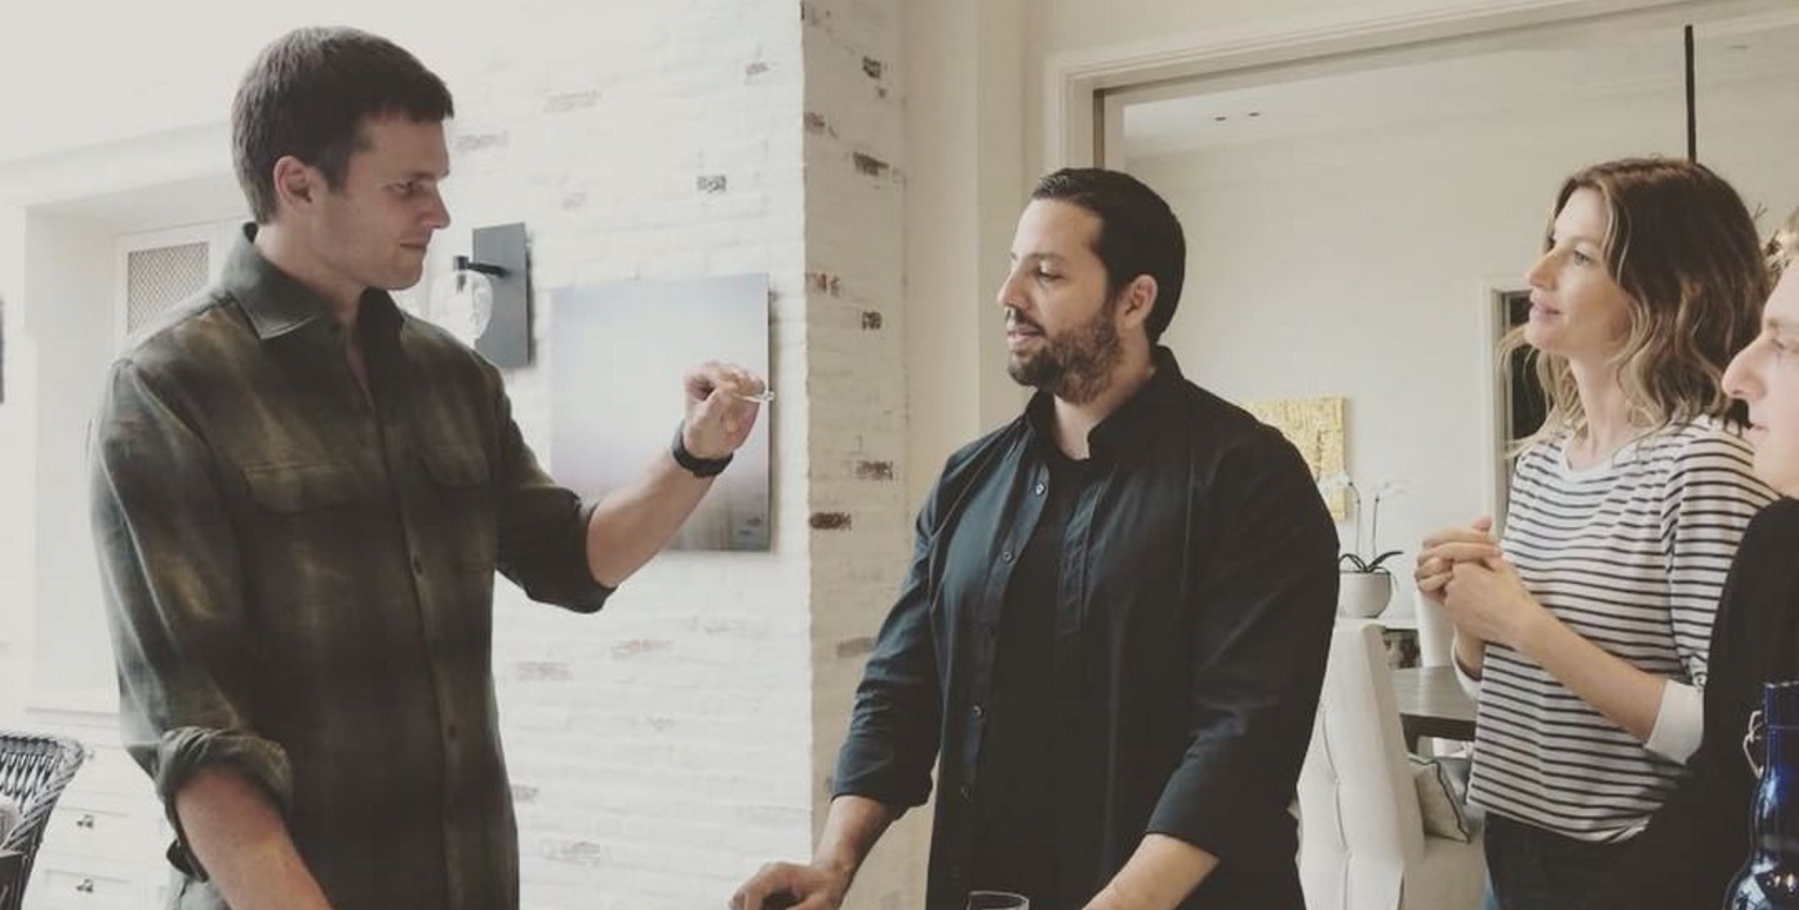 soort Scarp schoner David Blaine performed a private magic trick for Tom Brady and Gisele